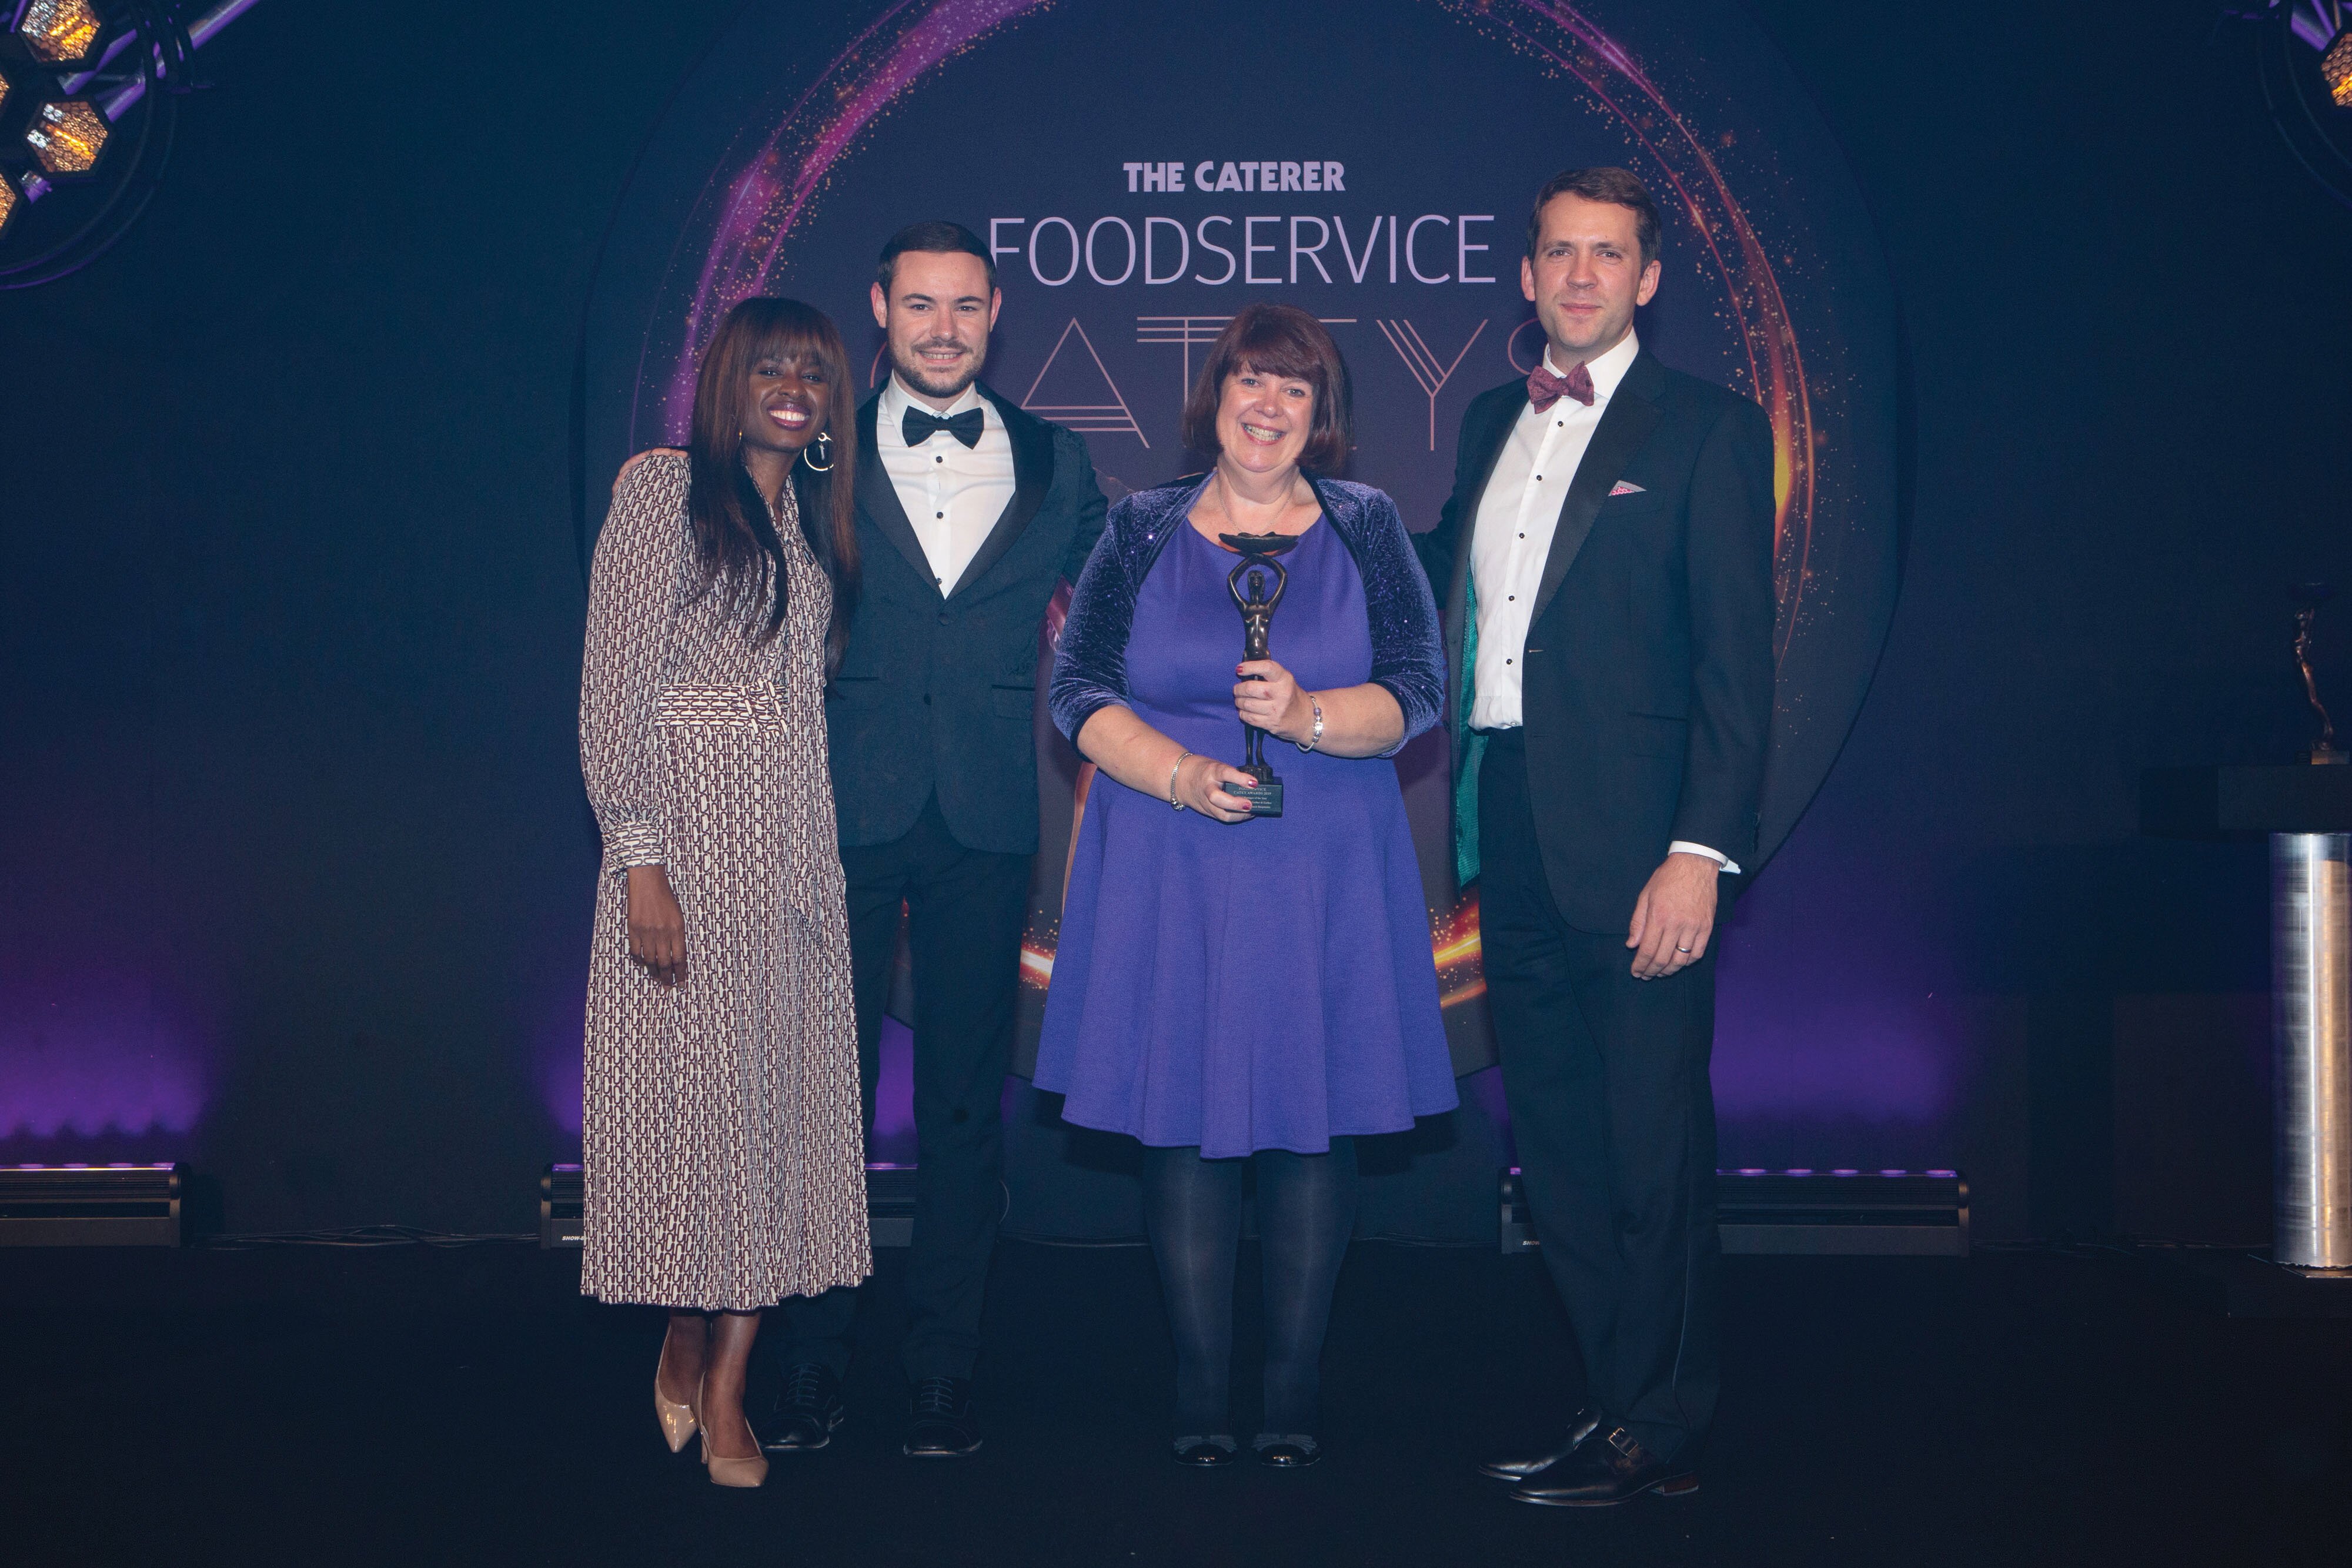 Foodservice Cateys 2019: Chef Manager of the Year – Andrea Fawcett, Gather & Gather